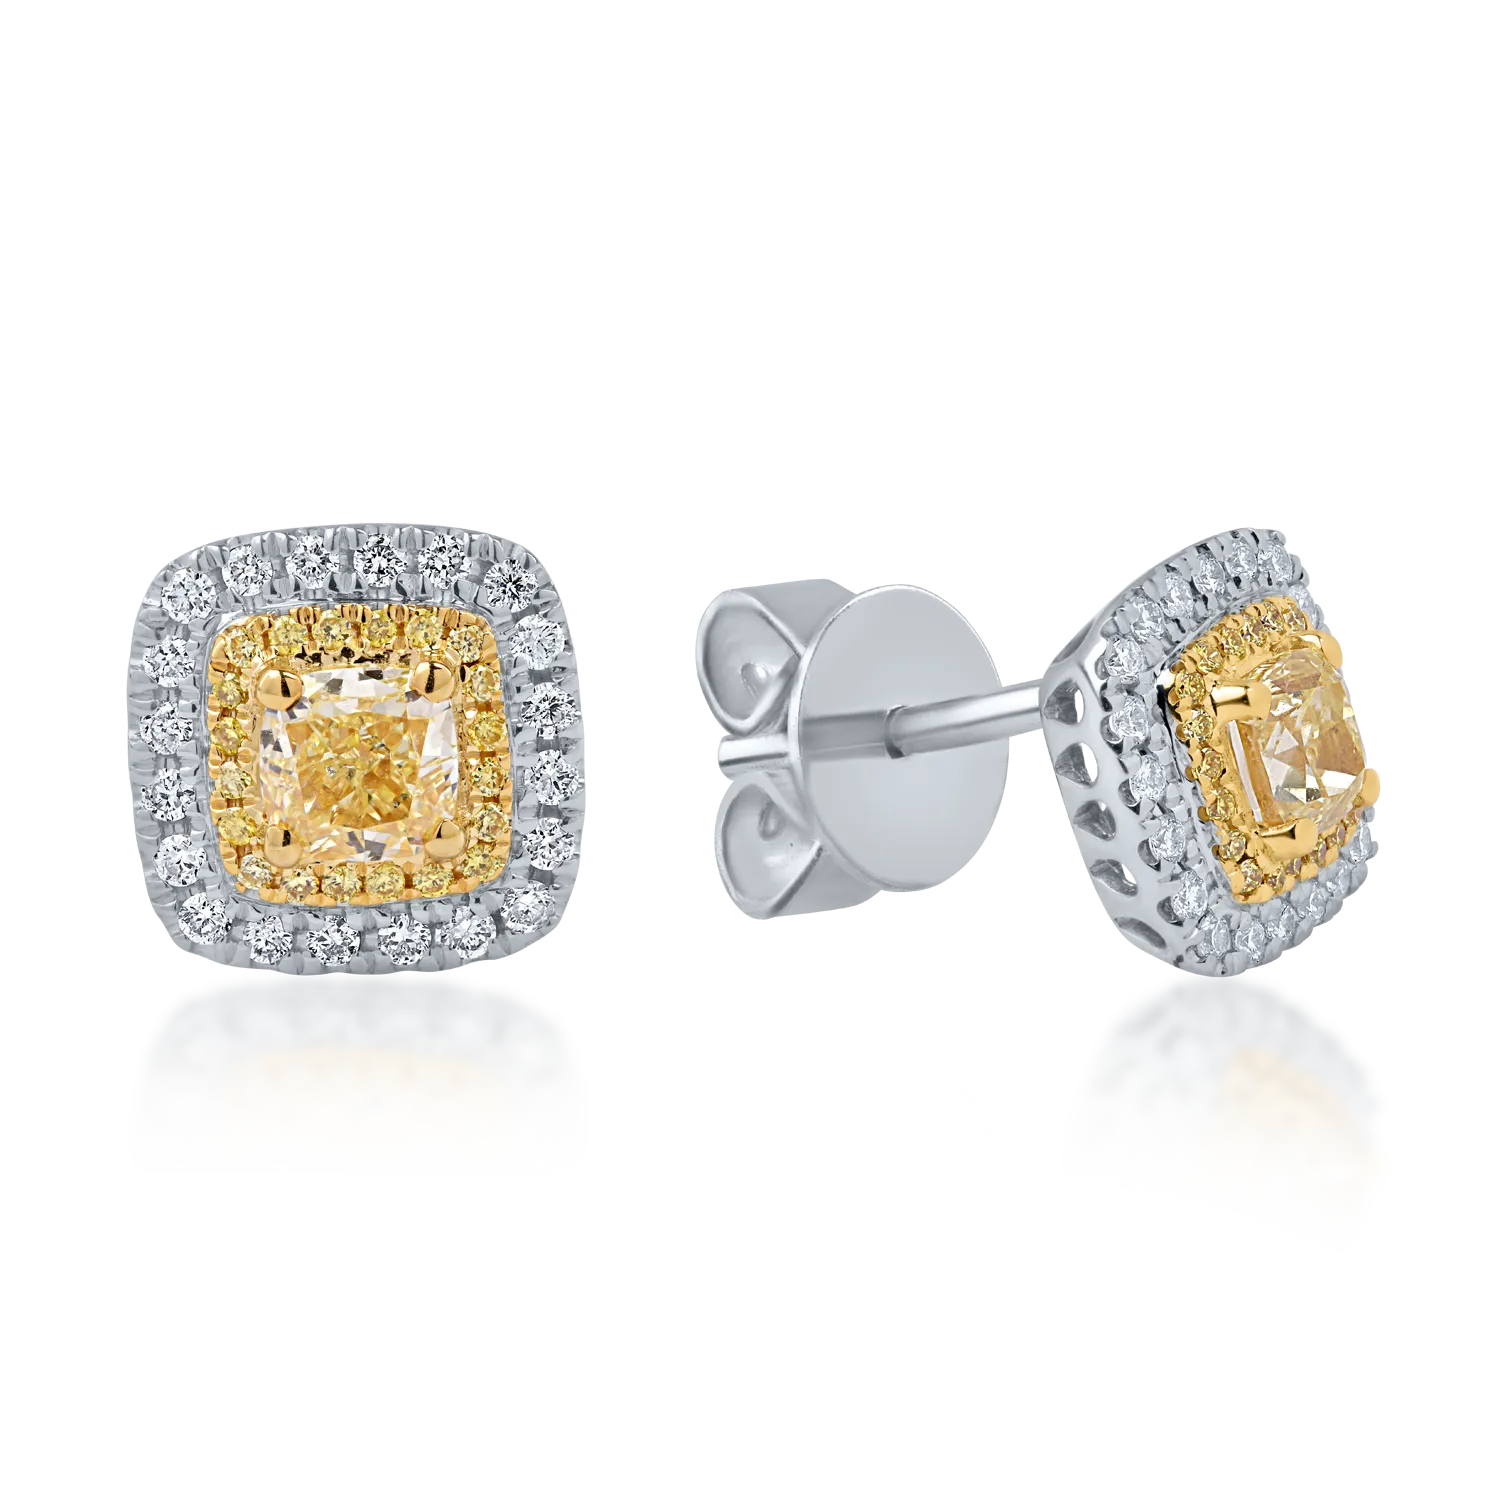 White-yellow gold earrings with 1.13ct yellow diamonds and 0.26ct clear diamonds